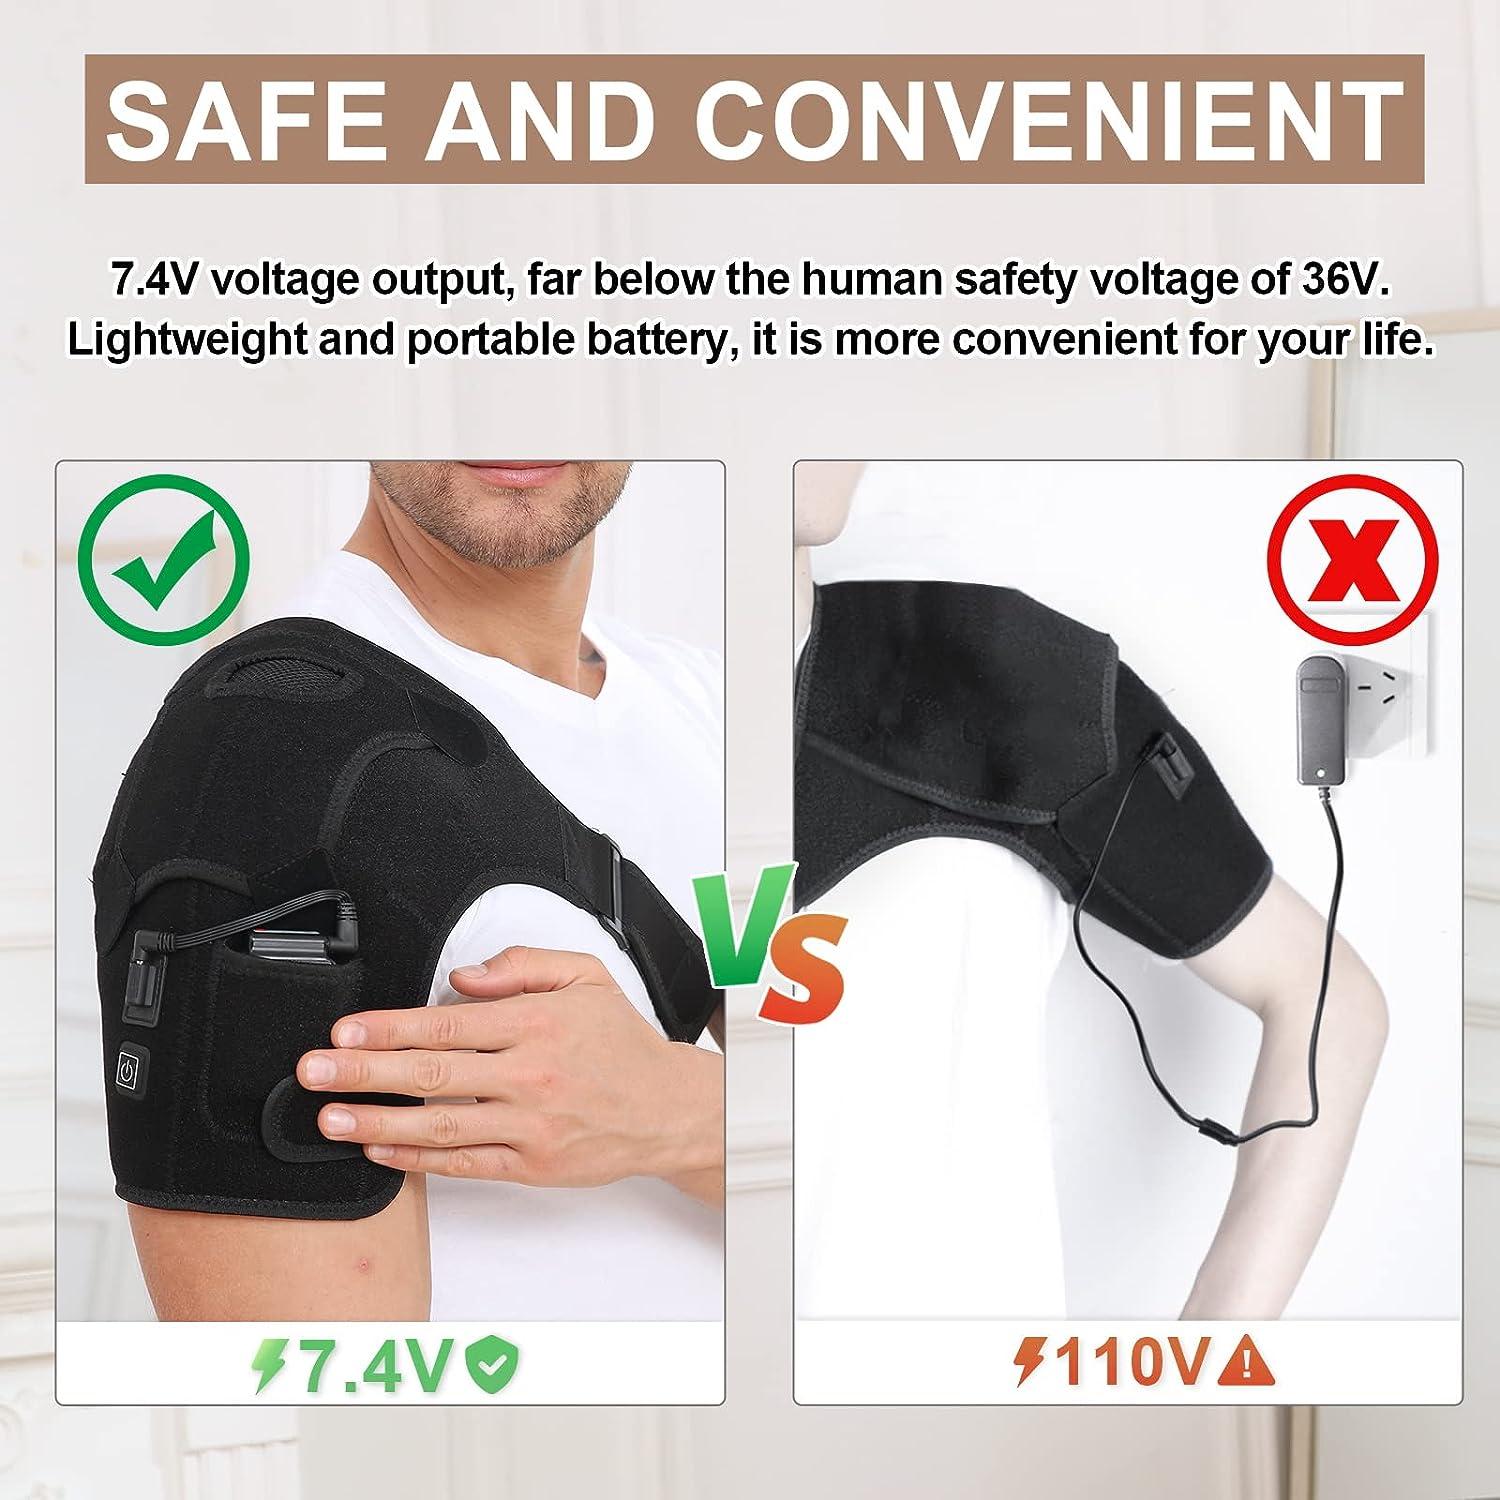 Heated Shoulder Brace Support Wrap, Heating Pad Support Brace For Rotator  Cuff